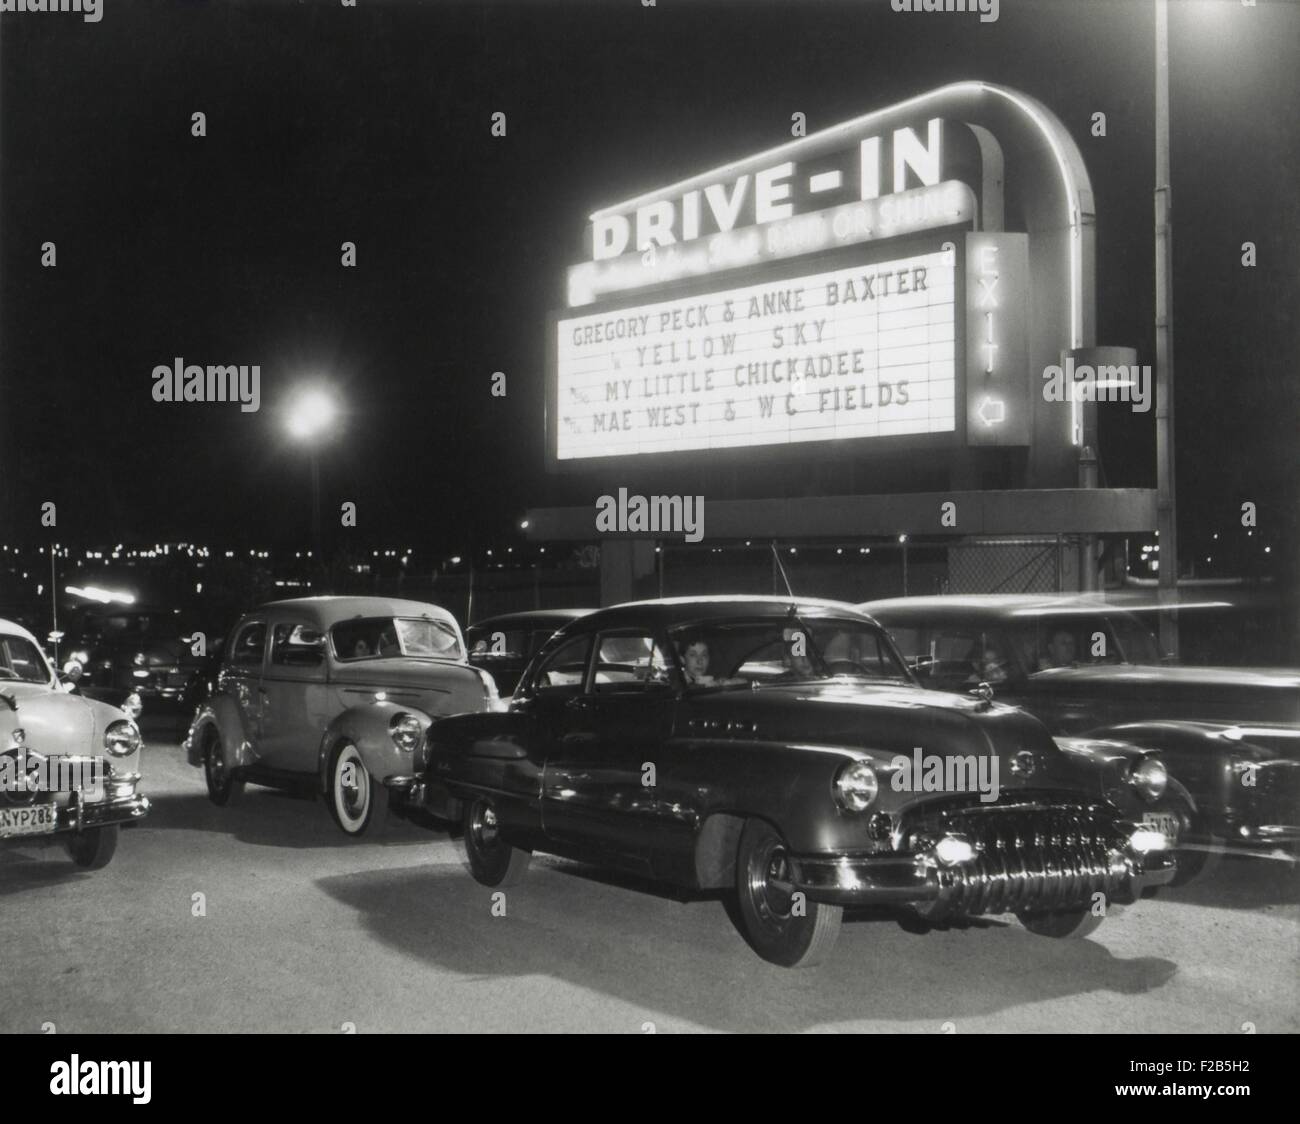 Cara at the Whitestone Bridge Drive-In Theater which opened in August 1949. The Drive-In Theater could accommodate 1,200 cars and was open 8 months of the year. It was showing a double feature, YELLOW SKY and MY LITLE CHICKADEE. - (BSLOC 2014 17 129) Stock Photo